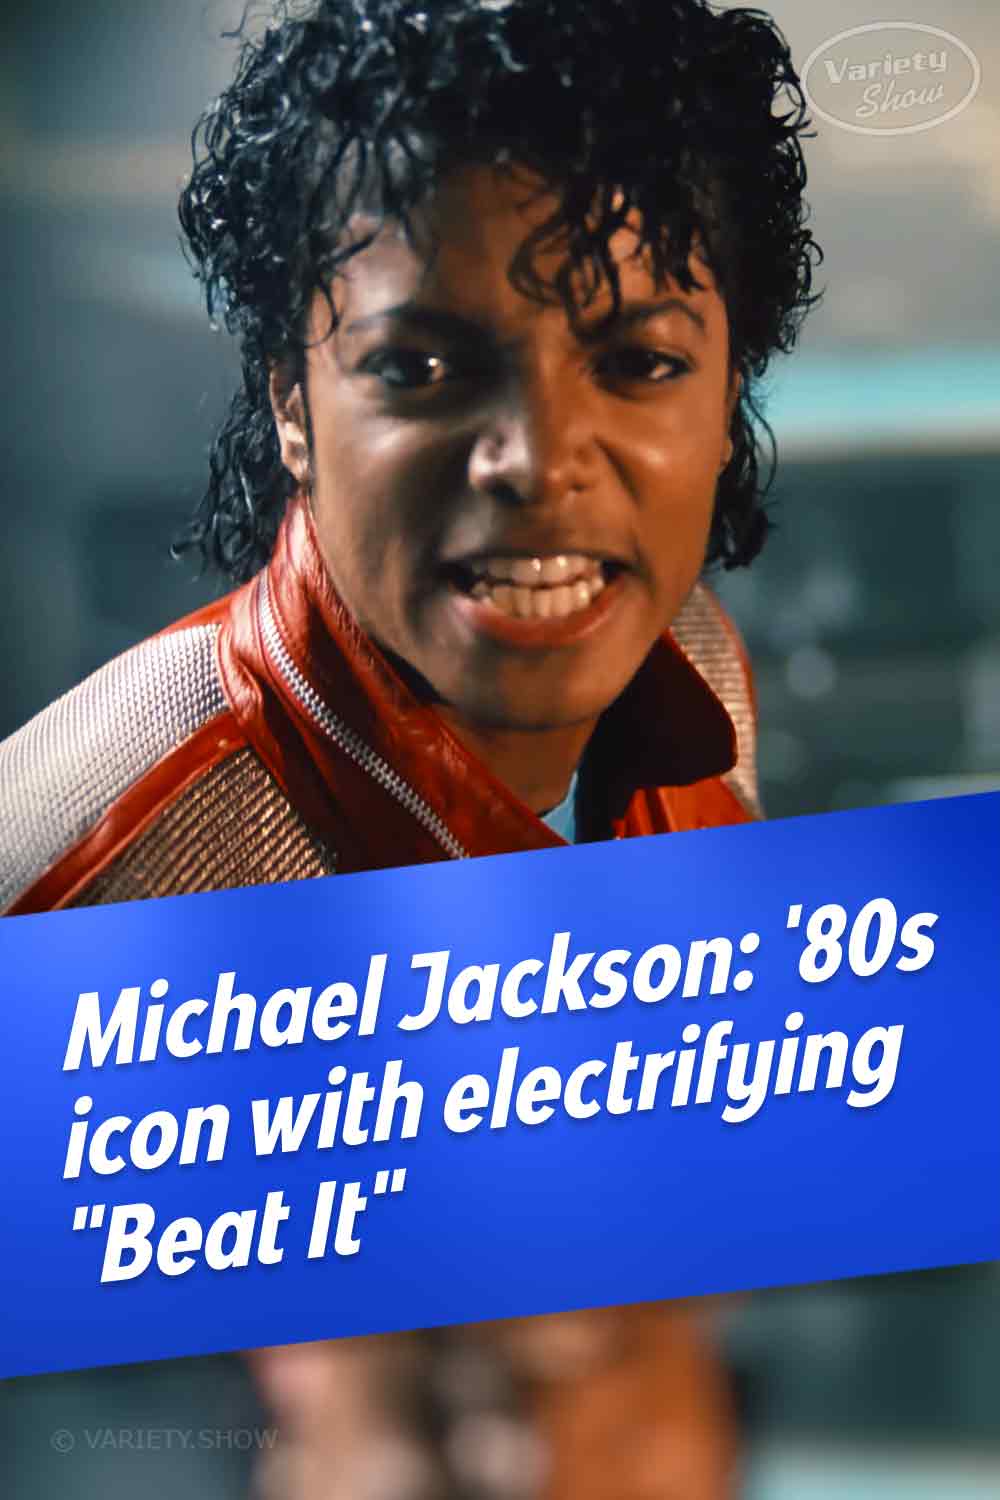 Michael Jackson: \'80s icon with electrifying \